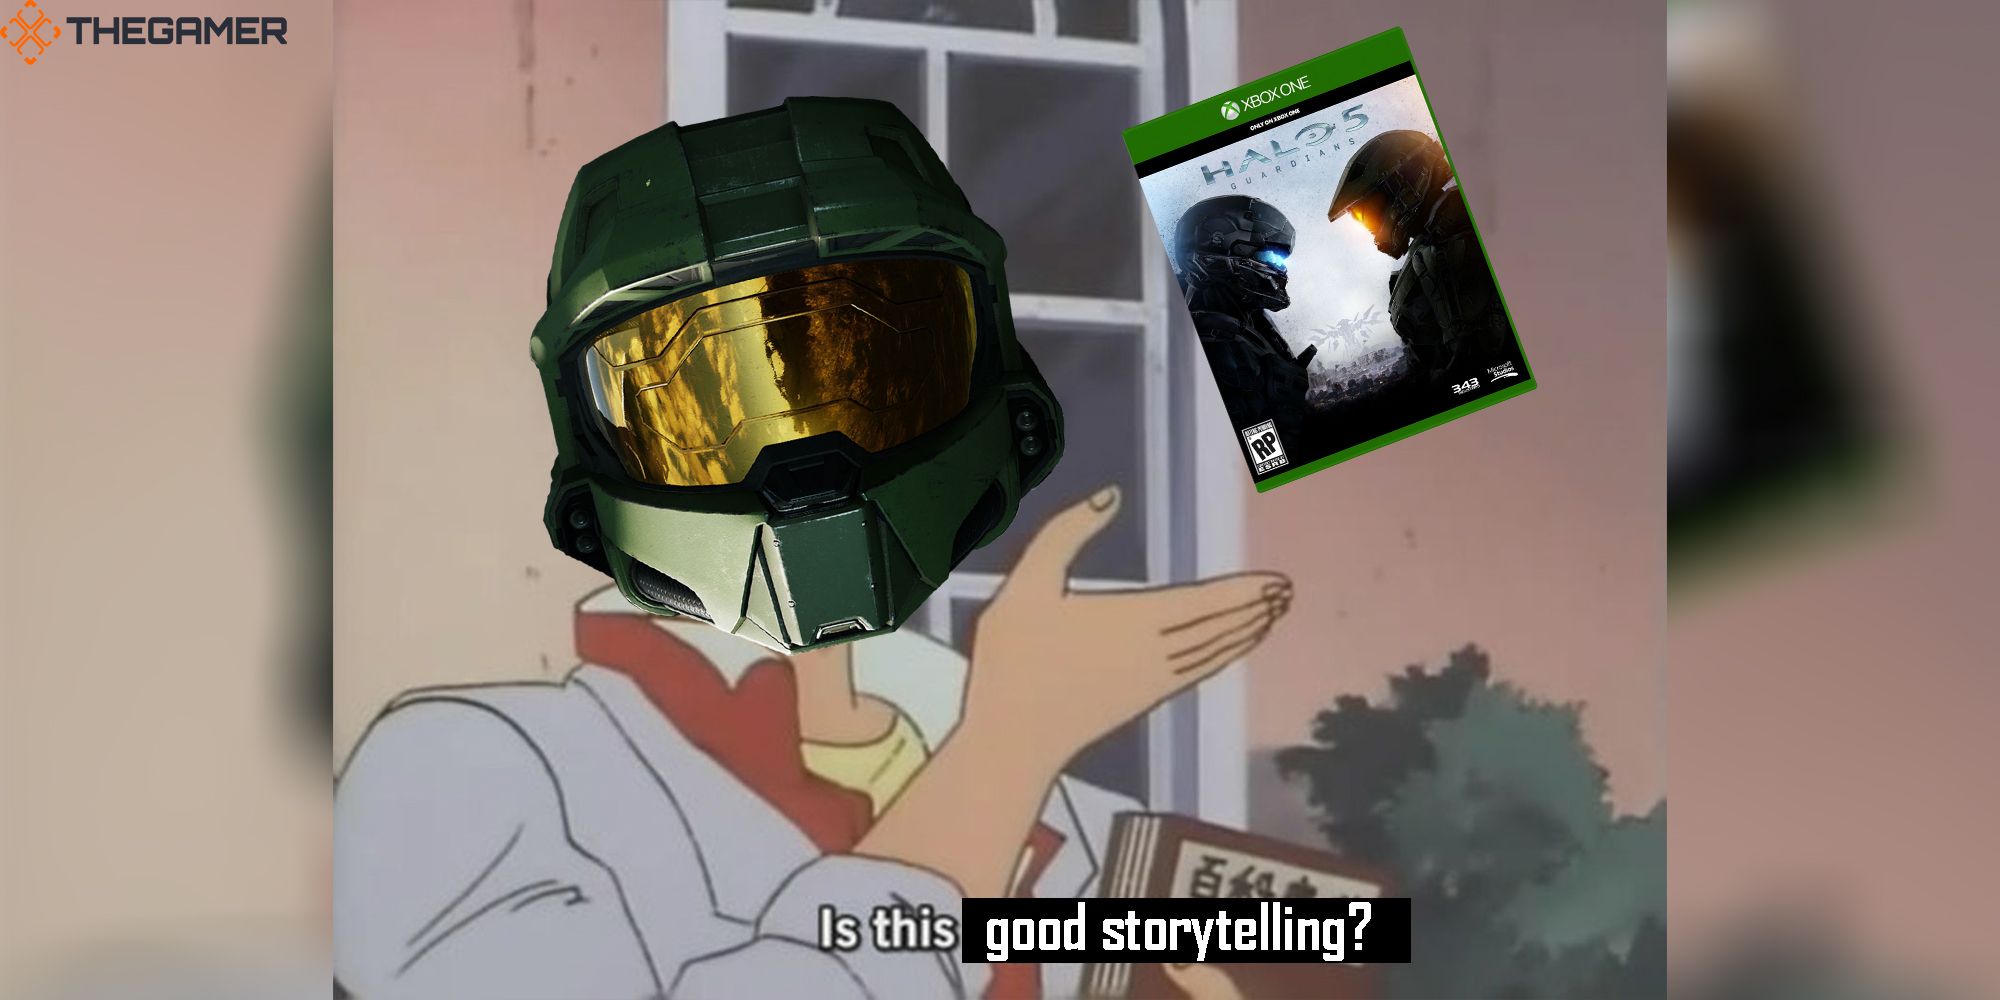 Master Chief sees a flying copy of Halo 5: Guardians and asks if it is good storytelling.